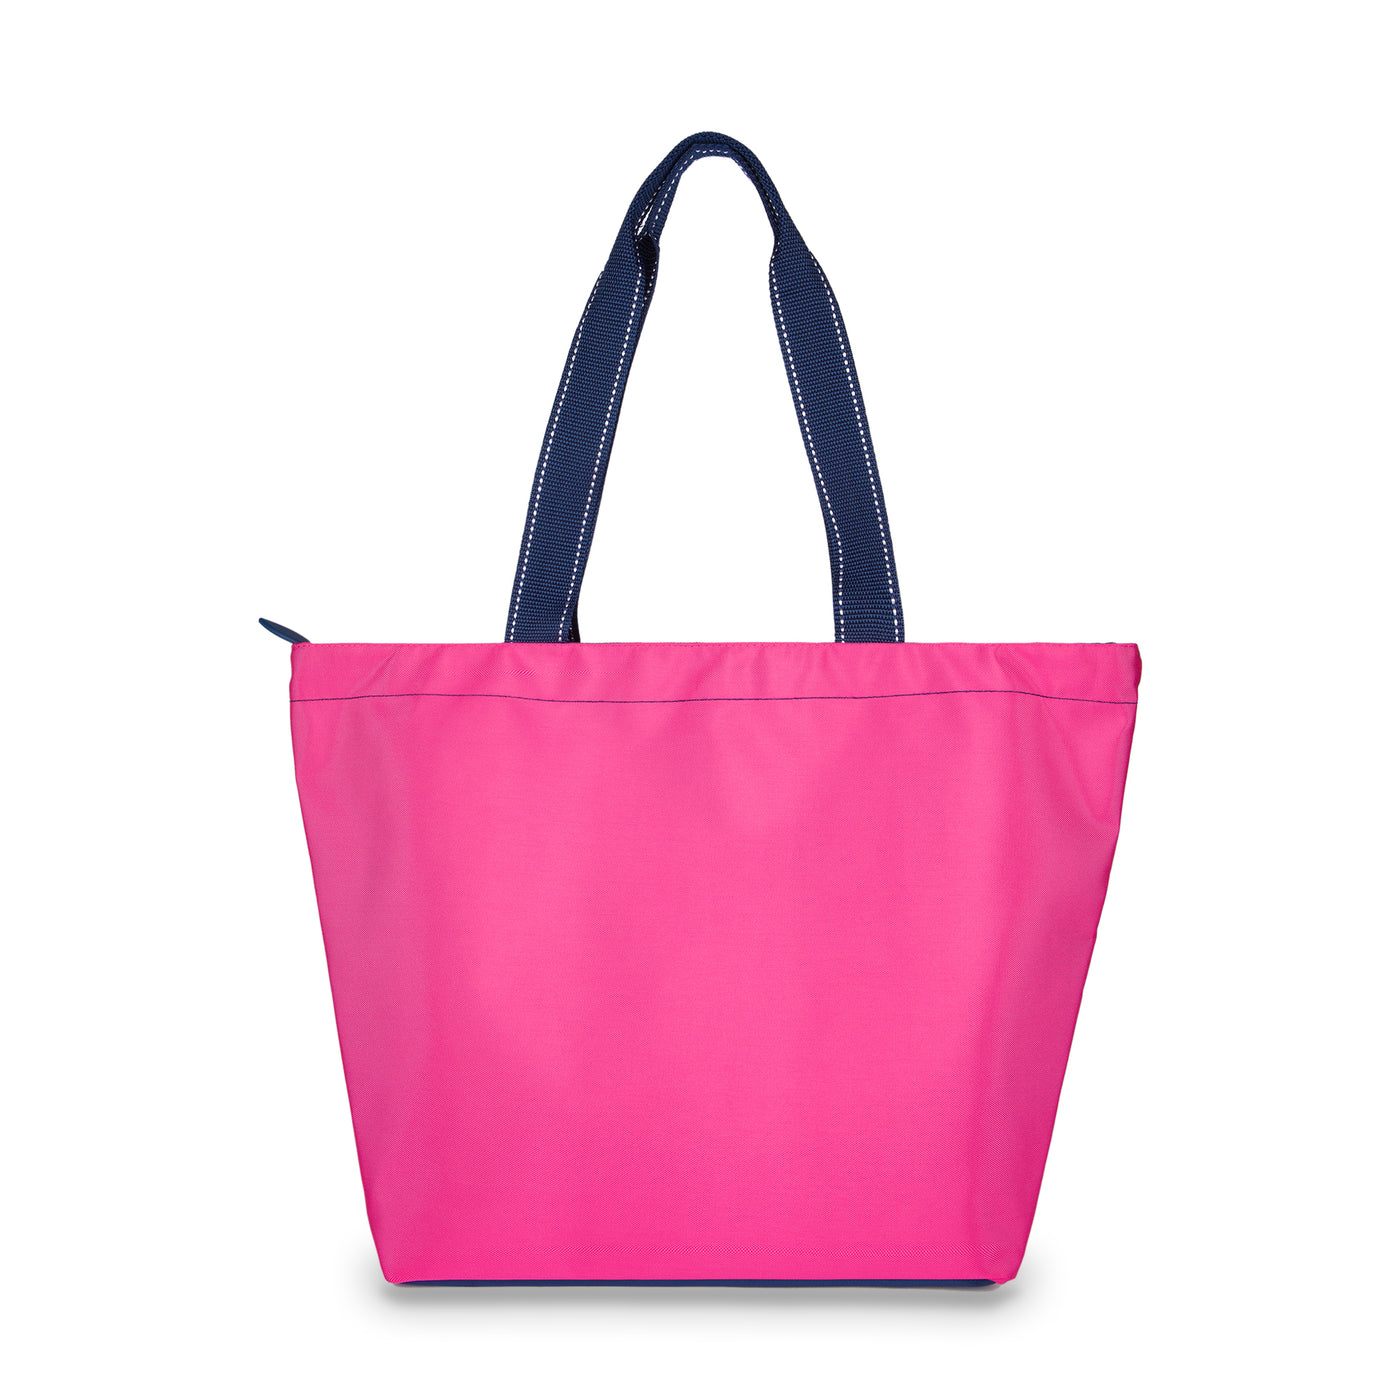 hot pink nylon tote bag with navy straps